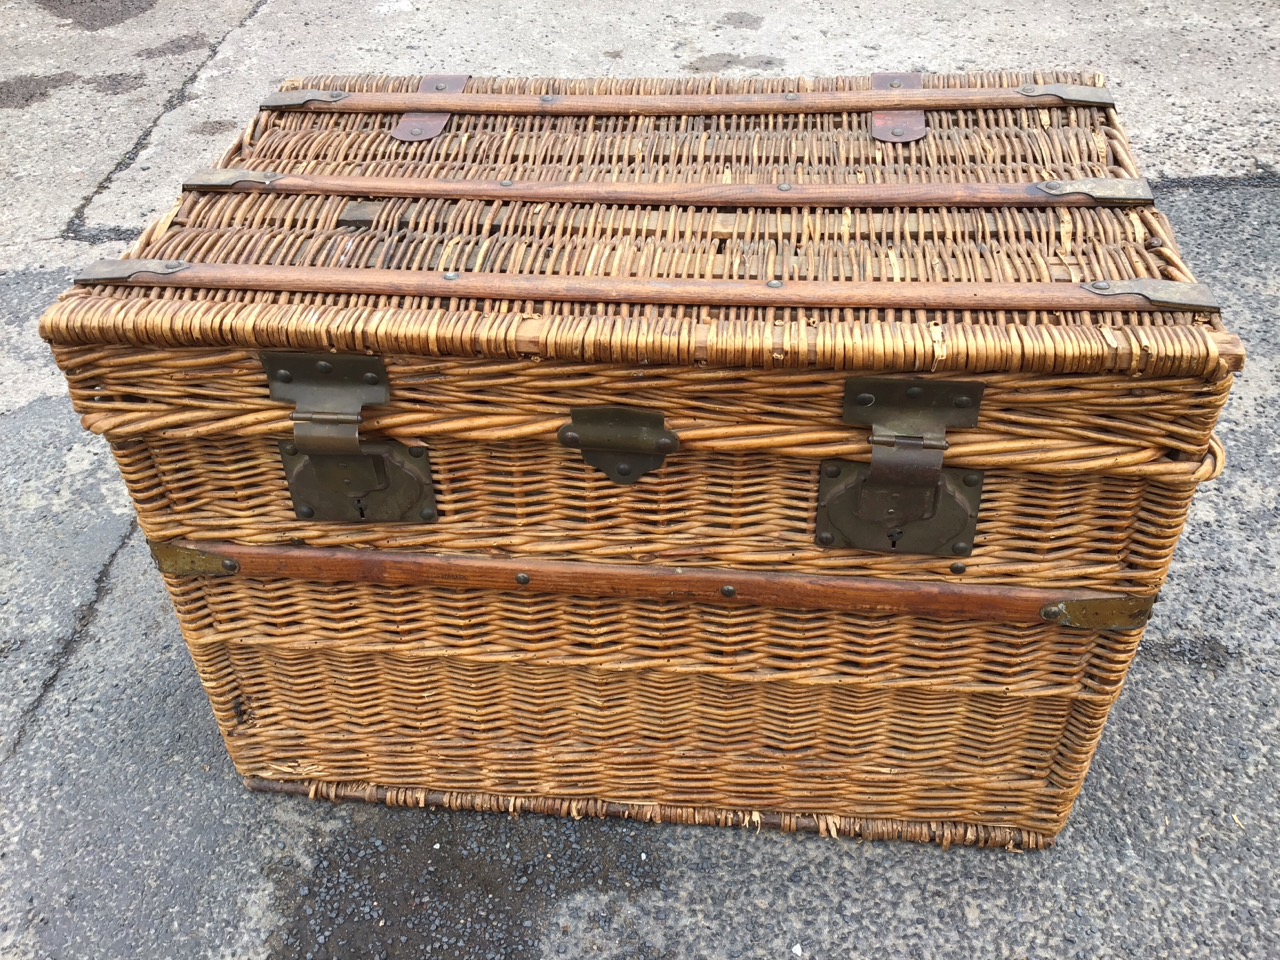 An Edwardian cane hamper or laundry basket with wood slats and brass mounts - the interior lined. ( - Image 2 of 3